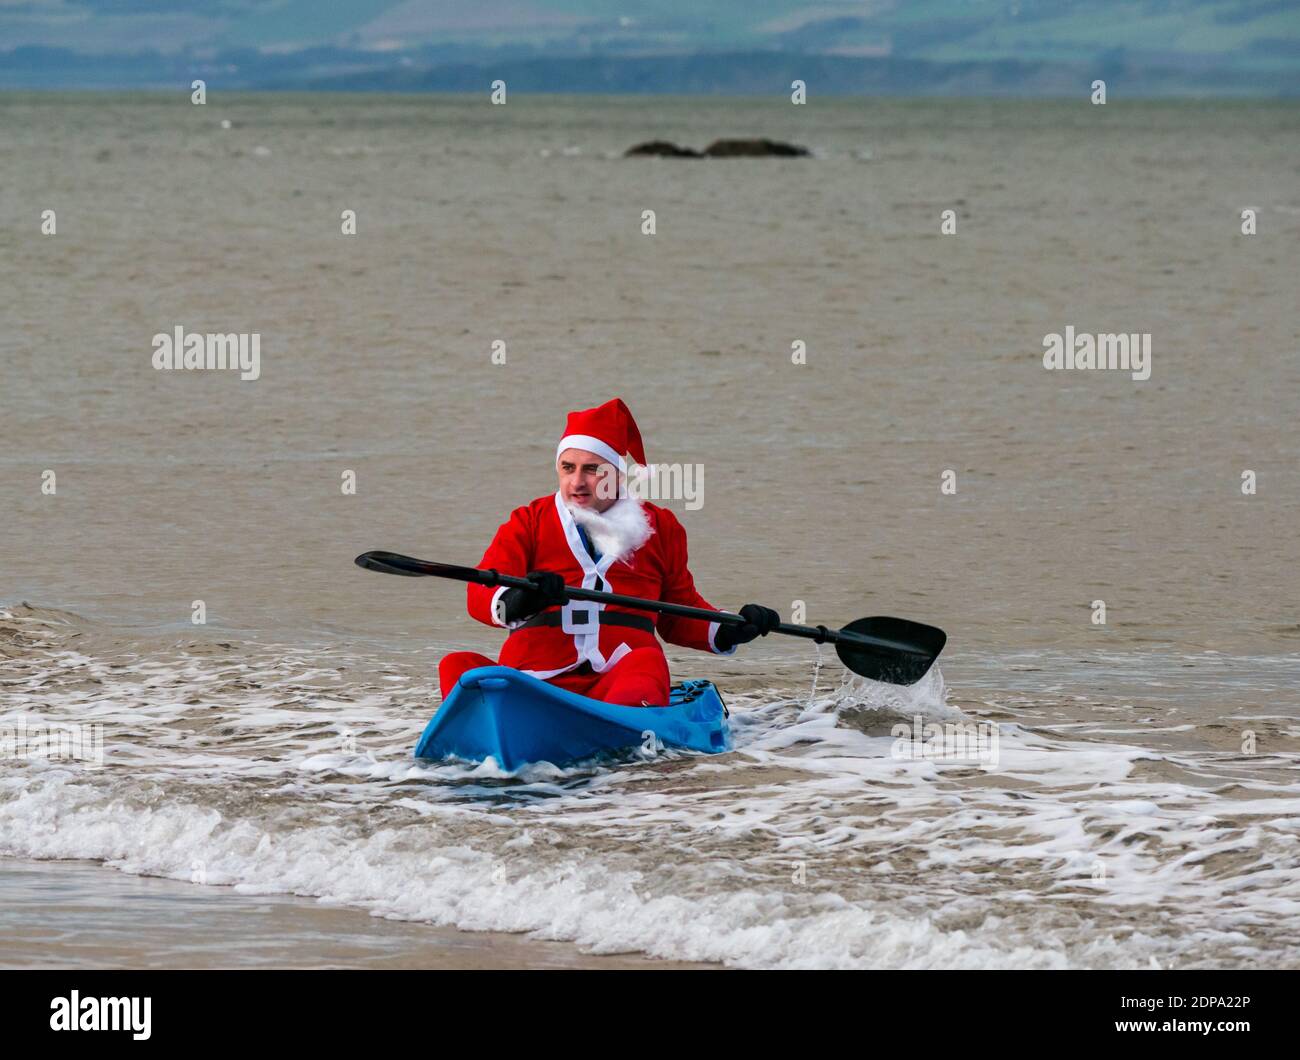 North Berwick, East Lothian, Scotland, United Kingdom, 19th December 2020. Paddle Boarding Santas for charity: a local community initiative by North Berwick News and Views called 'Christmas Cheer' raises over £5,000 funds for families in need Stock Photo